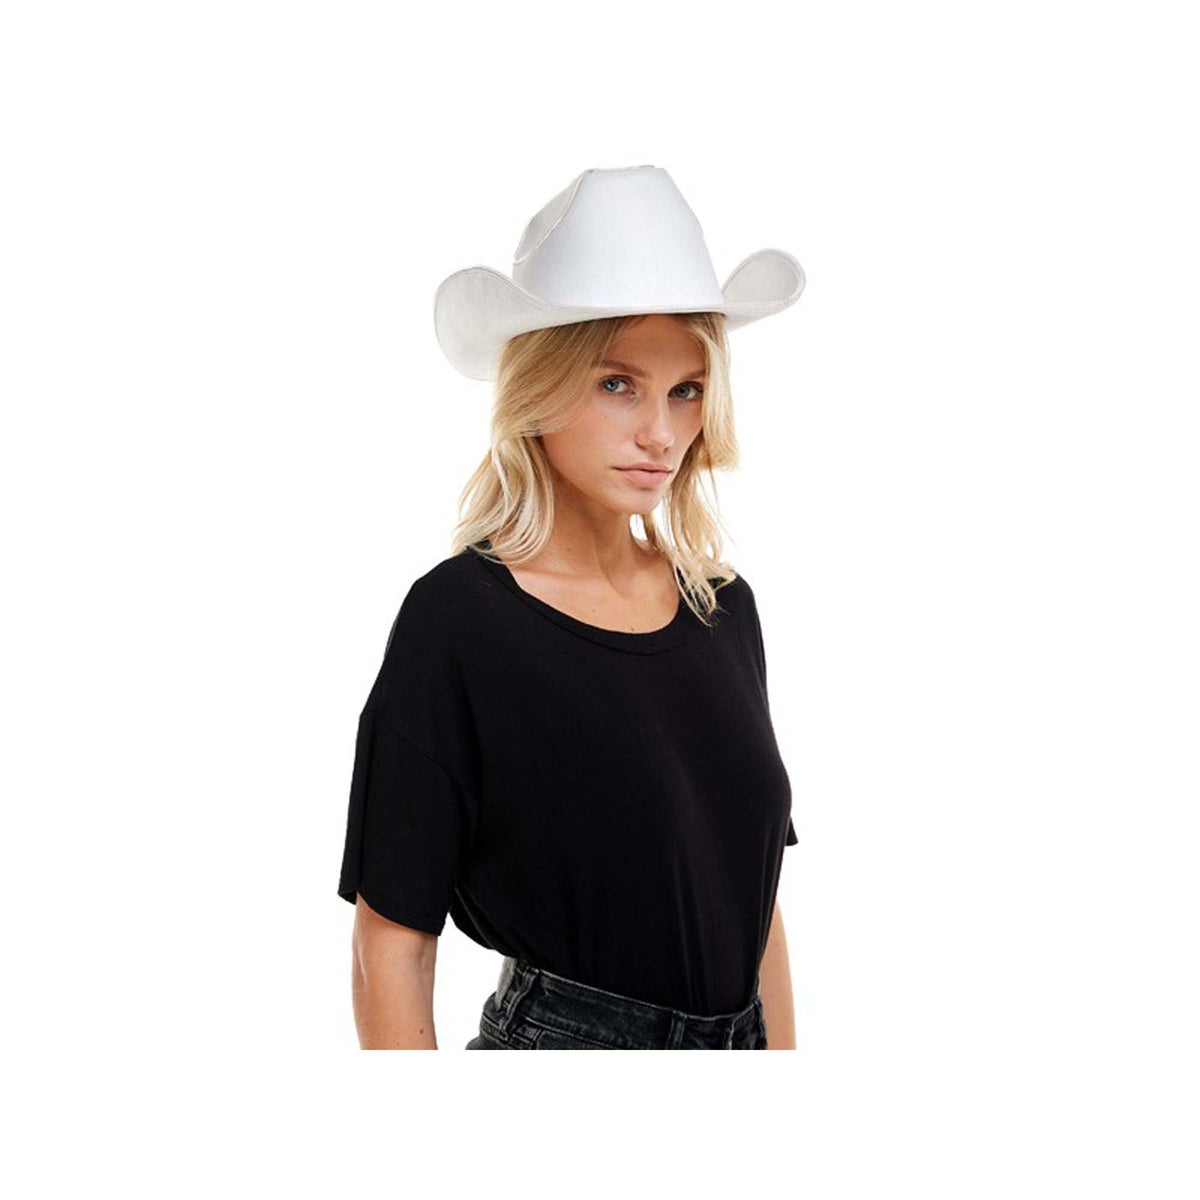 KBW GLOBAL CORP Costume Accessories White Light-Up Cowboy Hat for Adults